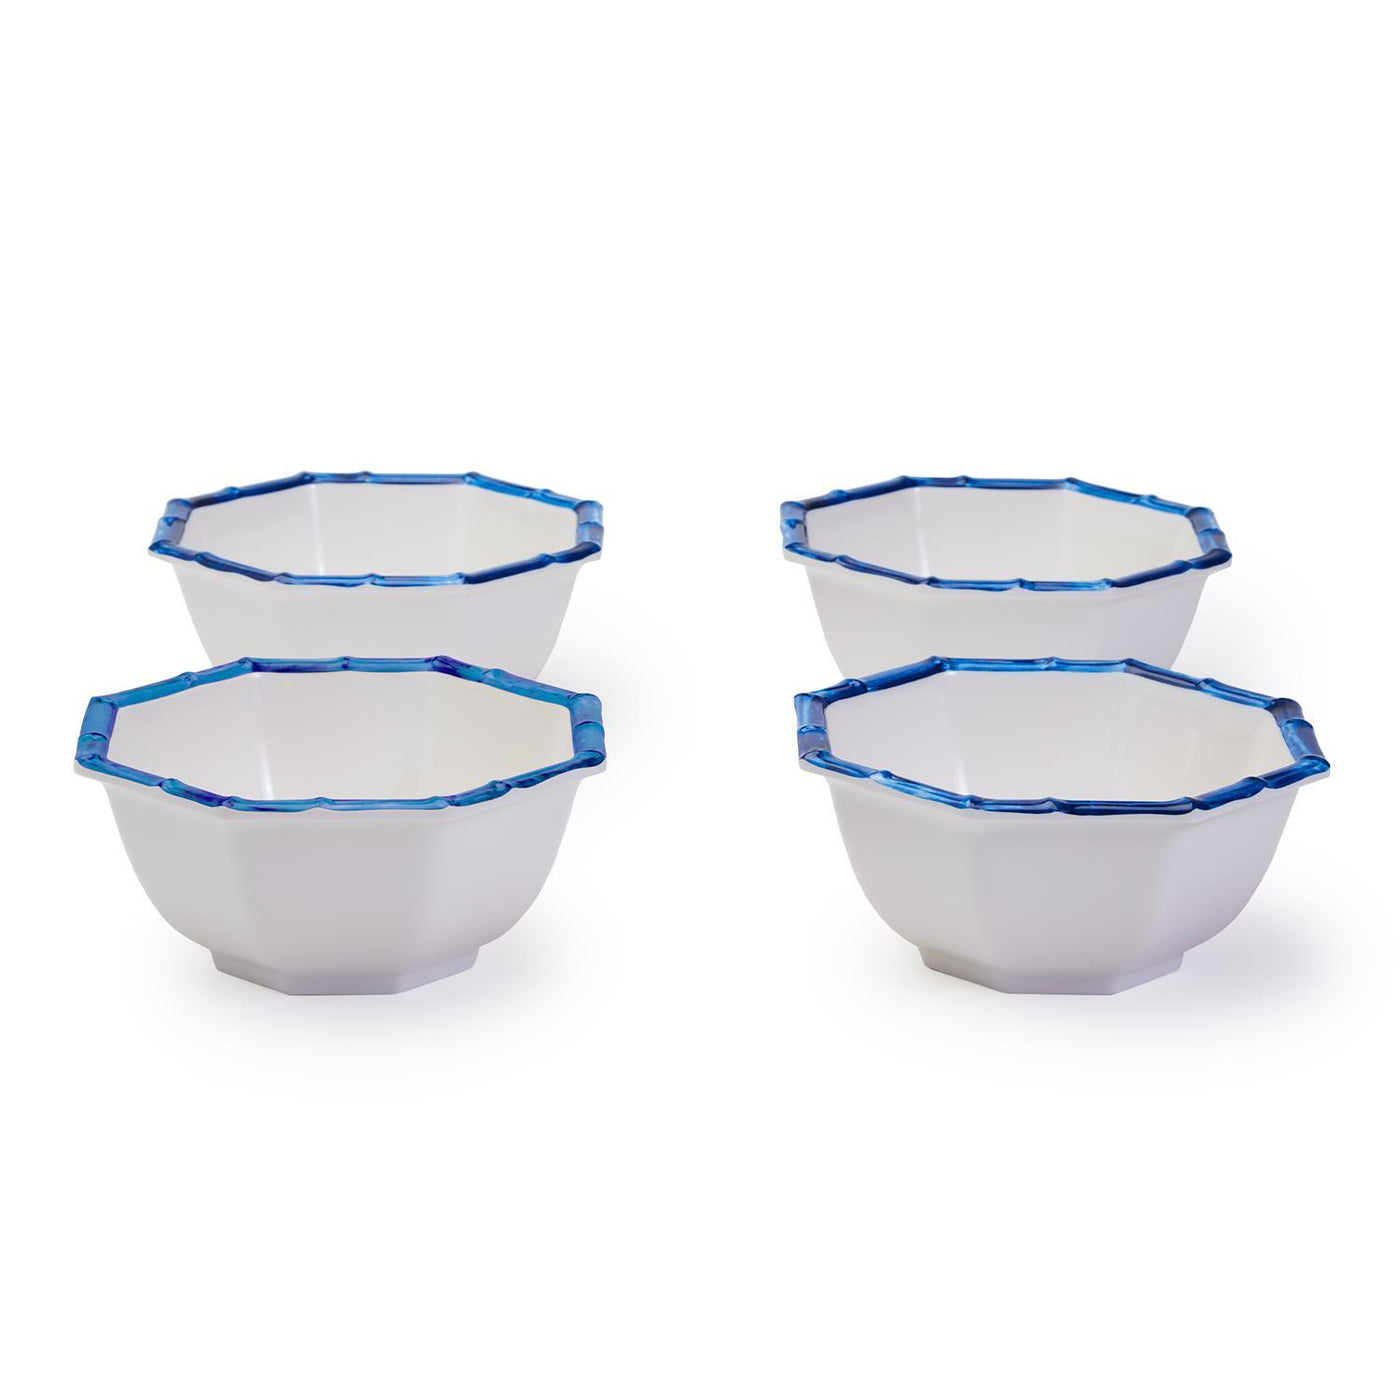 Bamboo Touch Octagonal Multipurpose Bowls Set of 4-Home/Giftware-Blue-Kevin's Fine Outdoor Gear & Apparel